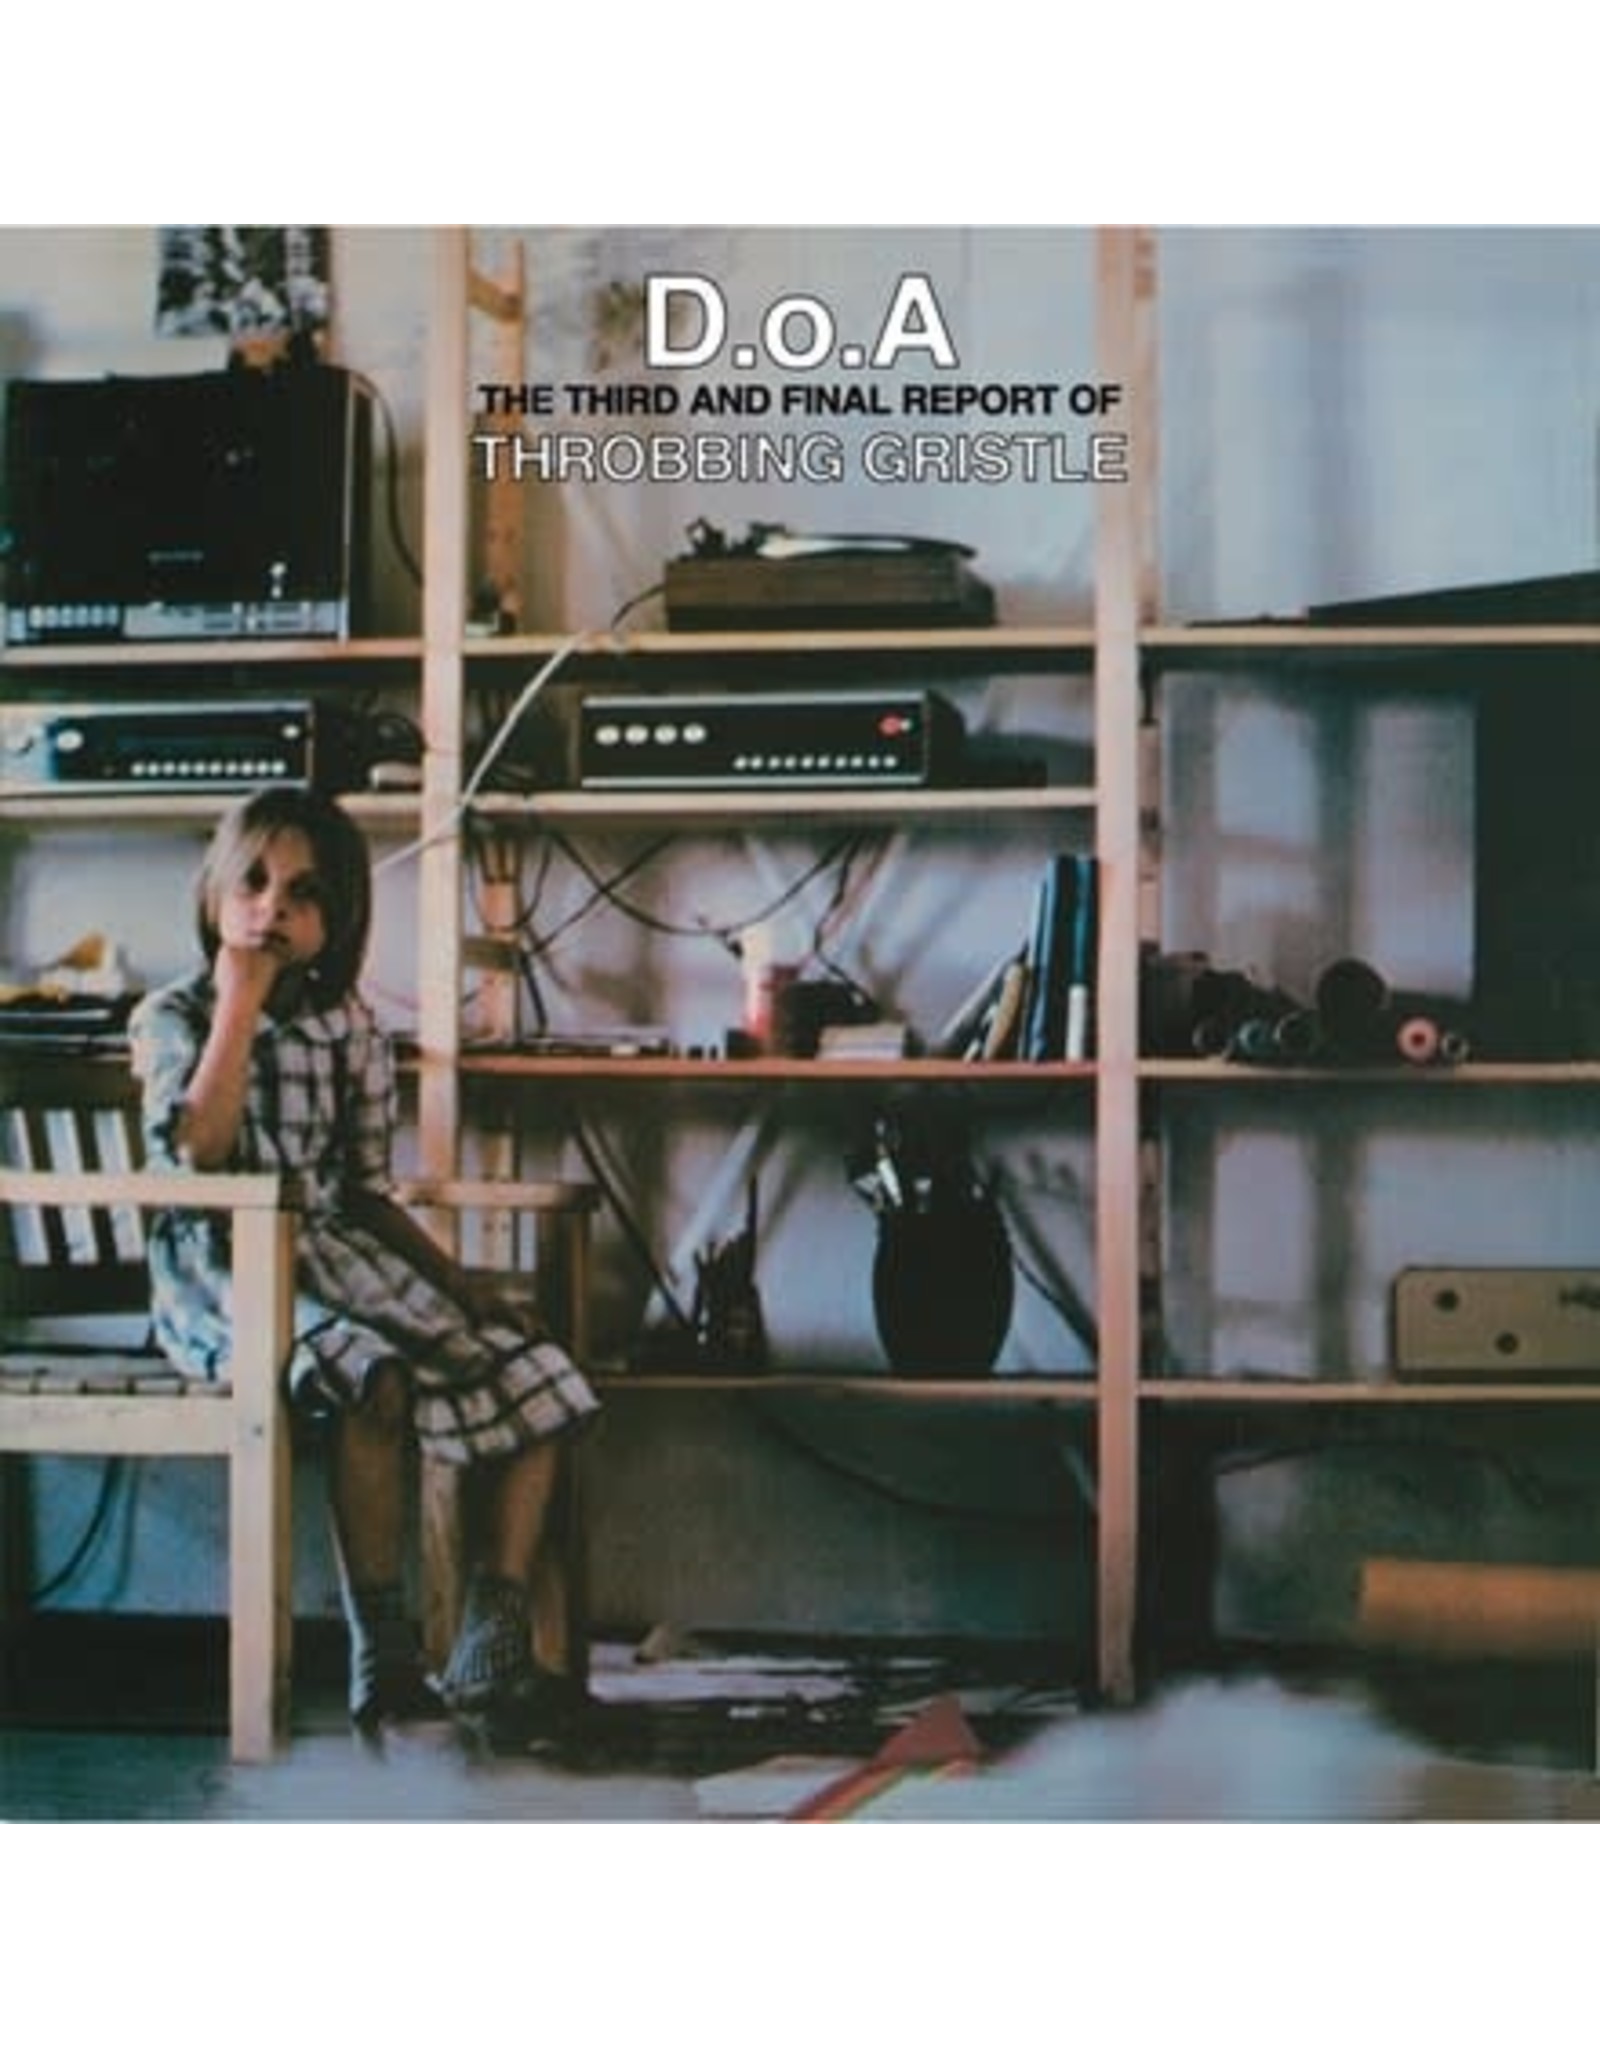 Mute Throbbing Gristle: D.O.A.: The Third And Final Report (green) LP